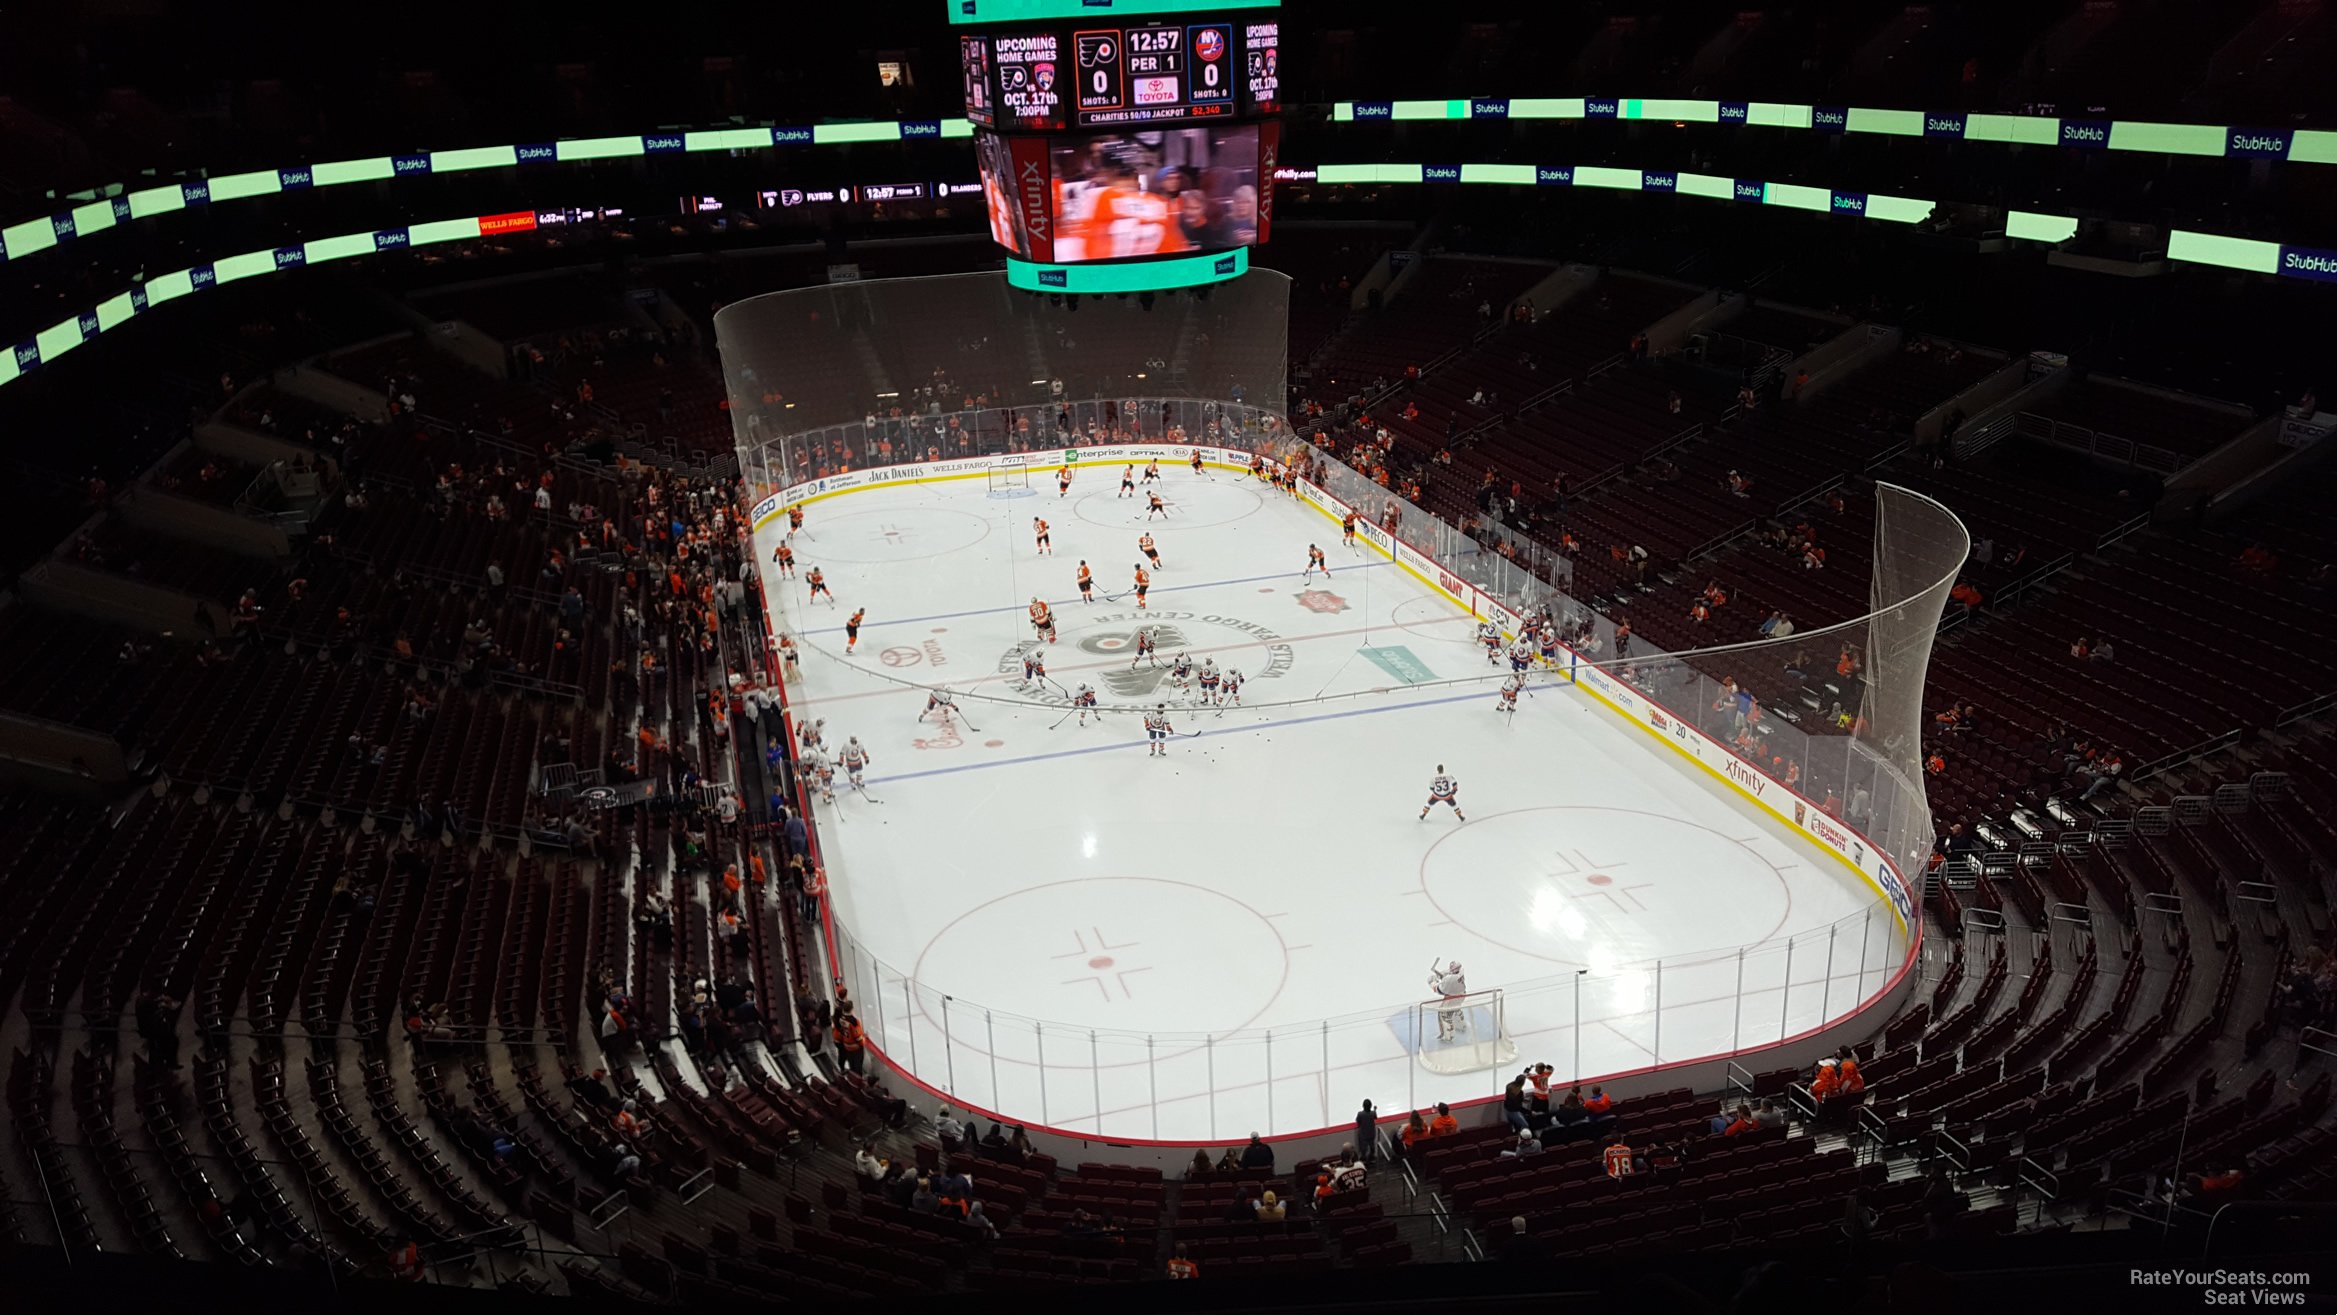 section 206, row 8 seat view  for hockey - wells fargo center